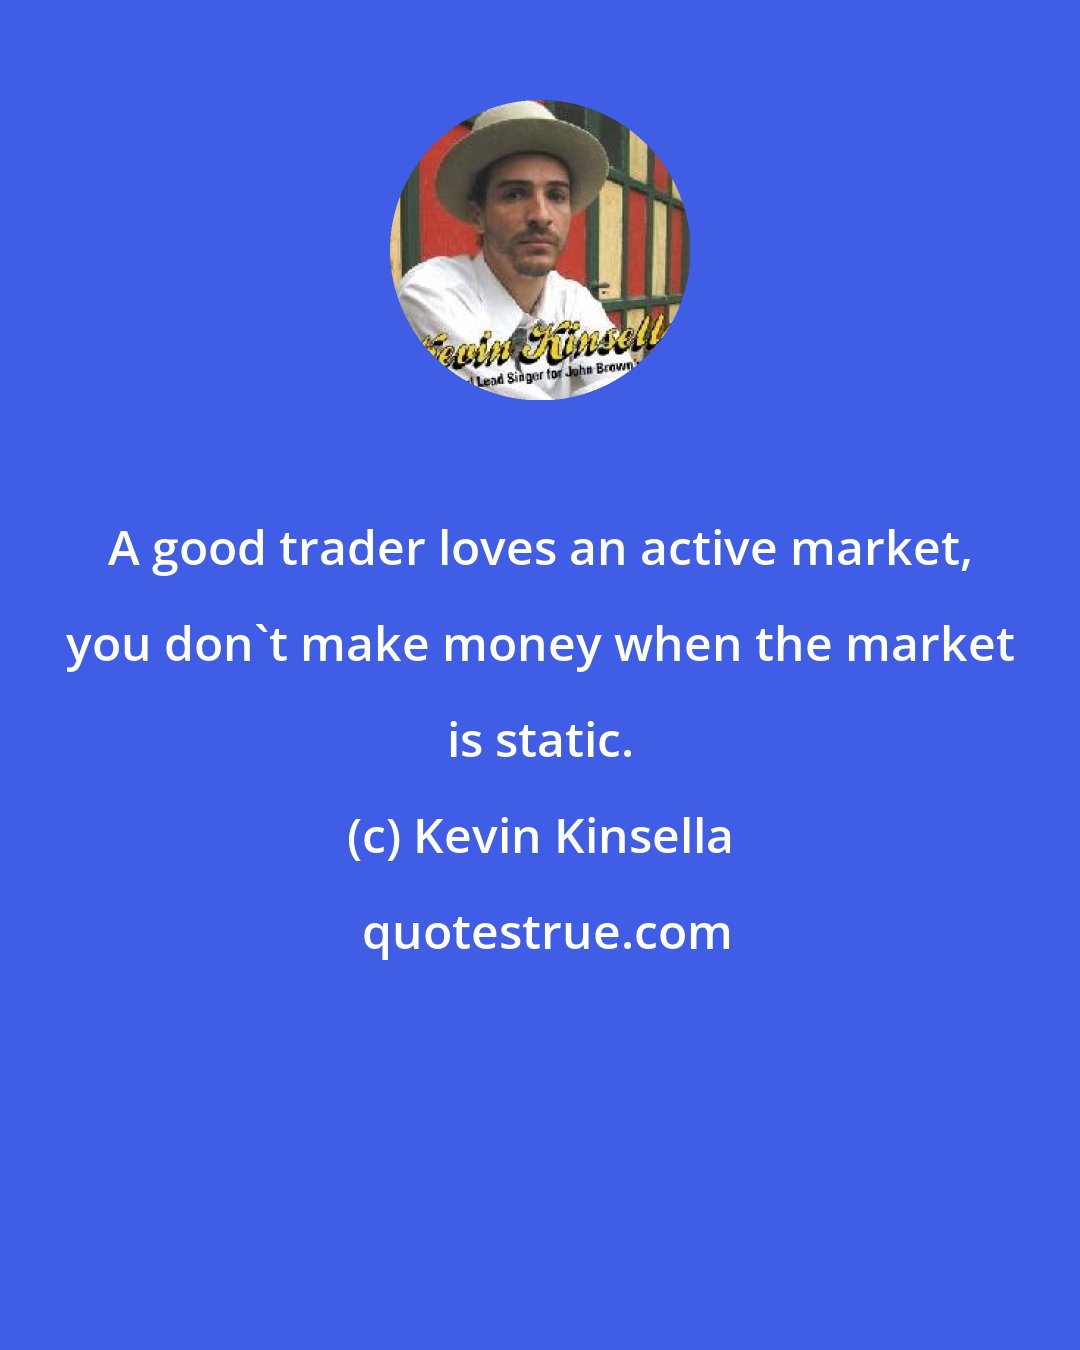 Kevin Kinsella: A good trader loves an active market, you don't make money when the market is static.